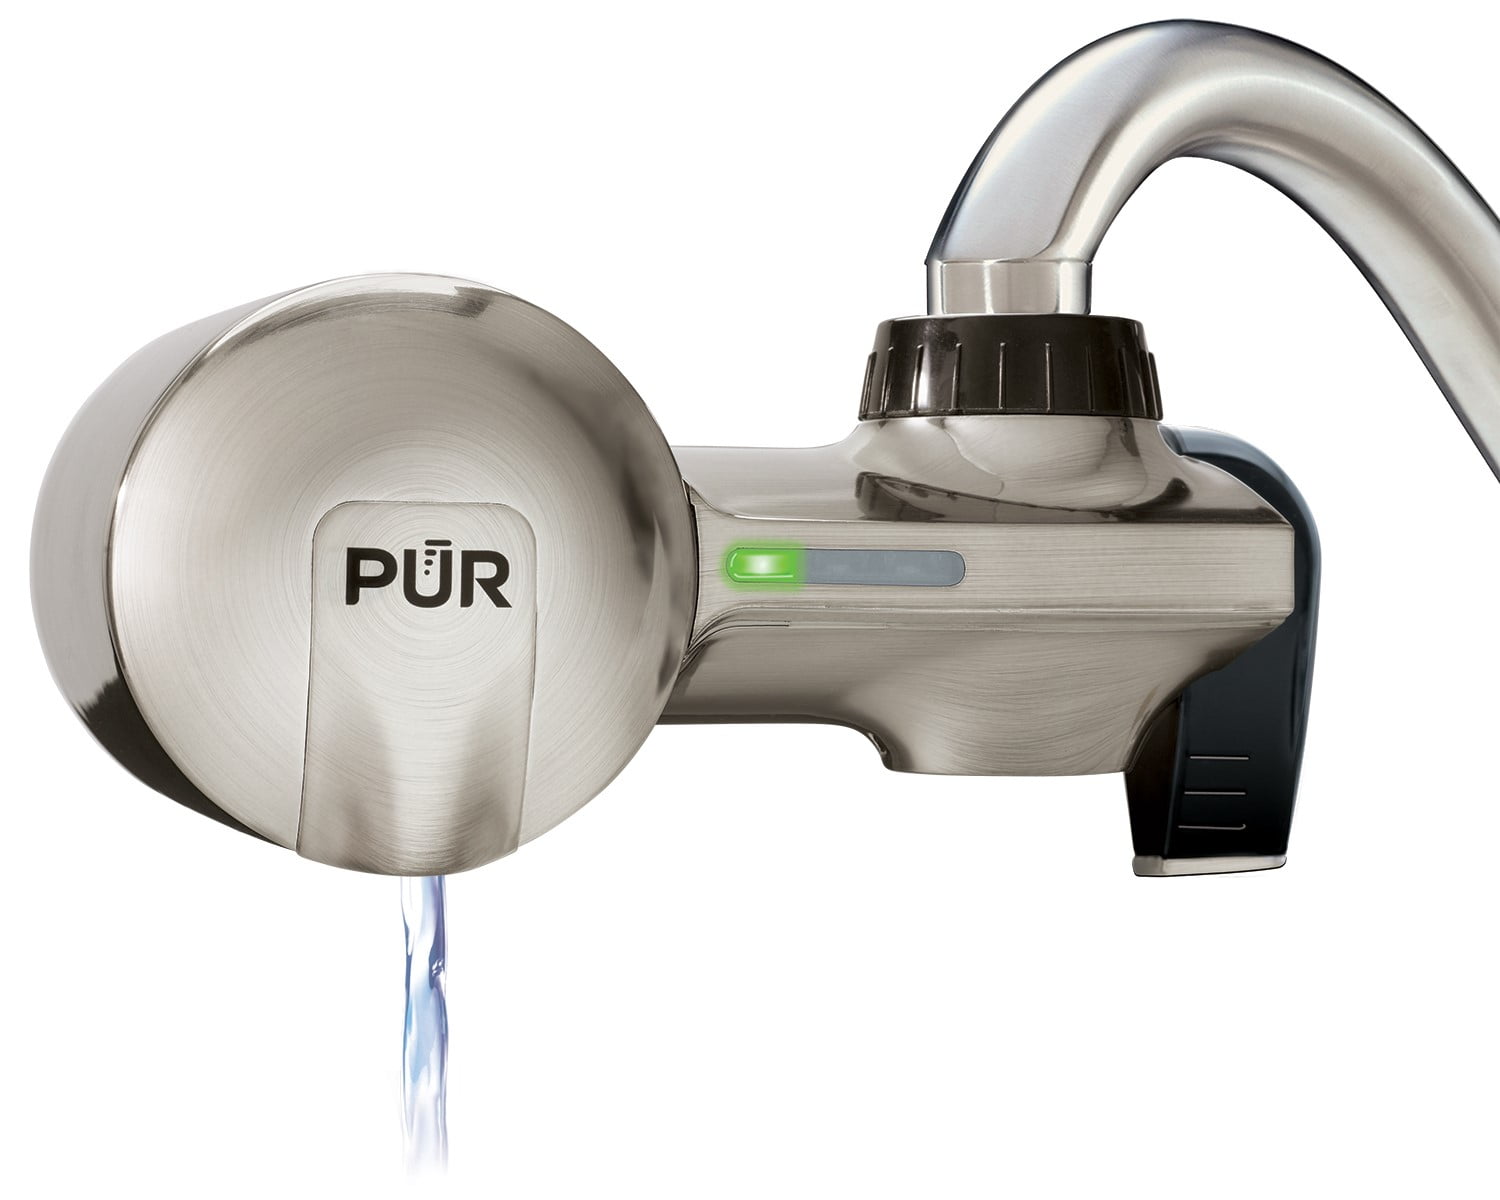 Pur Advanced Faucet Water Filter Pfm450s Stainless Steel Style